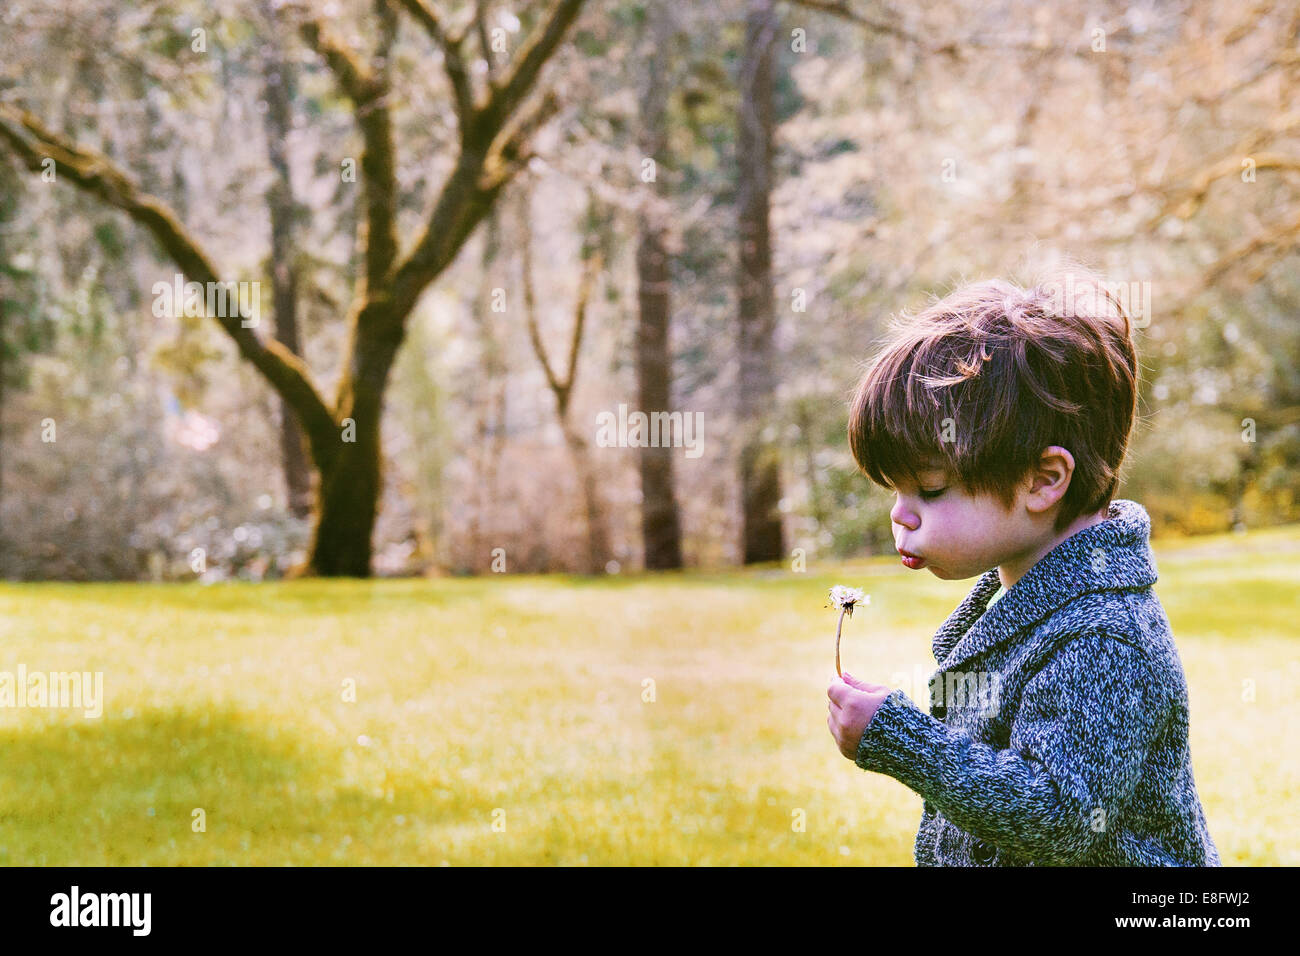 Boy standing in a park blowing dandelion, USA Stock Photo